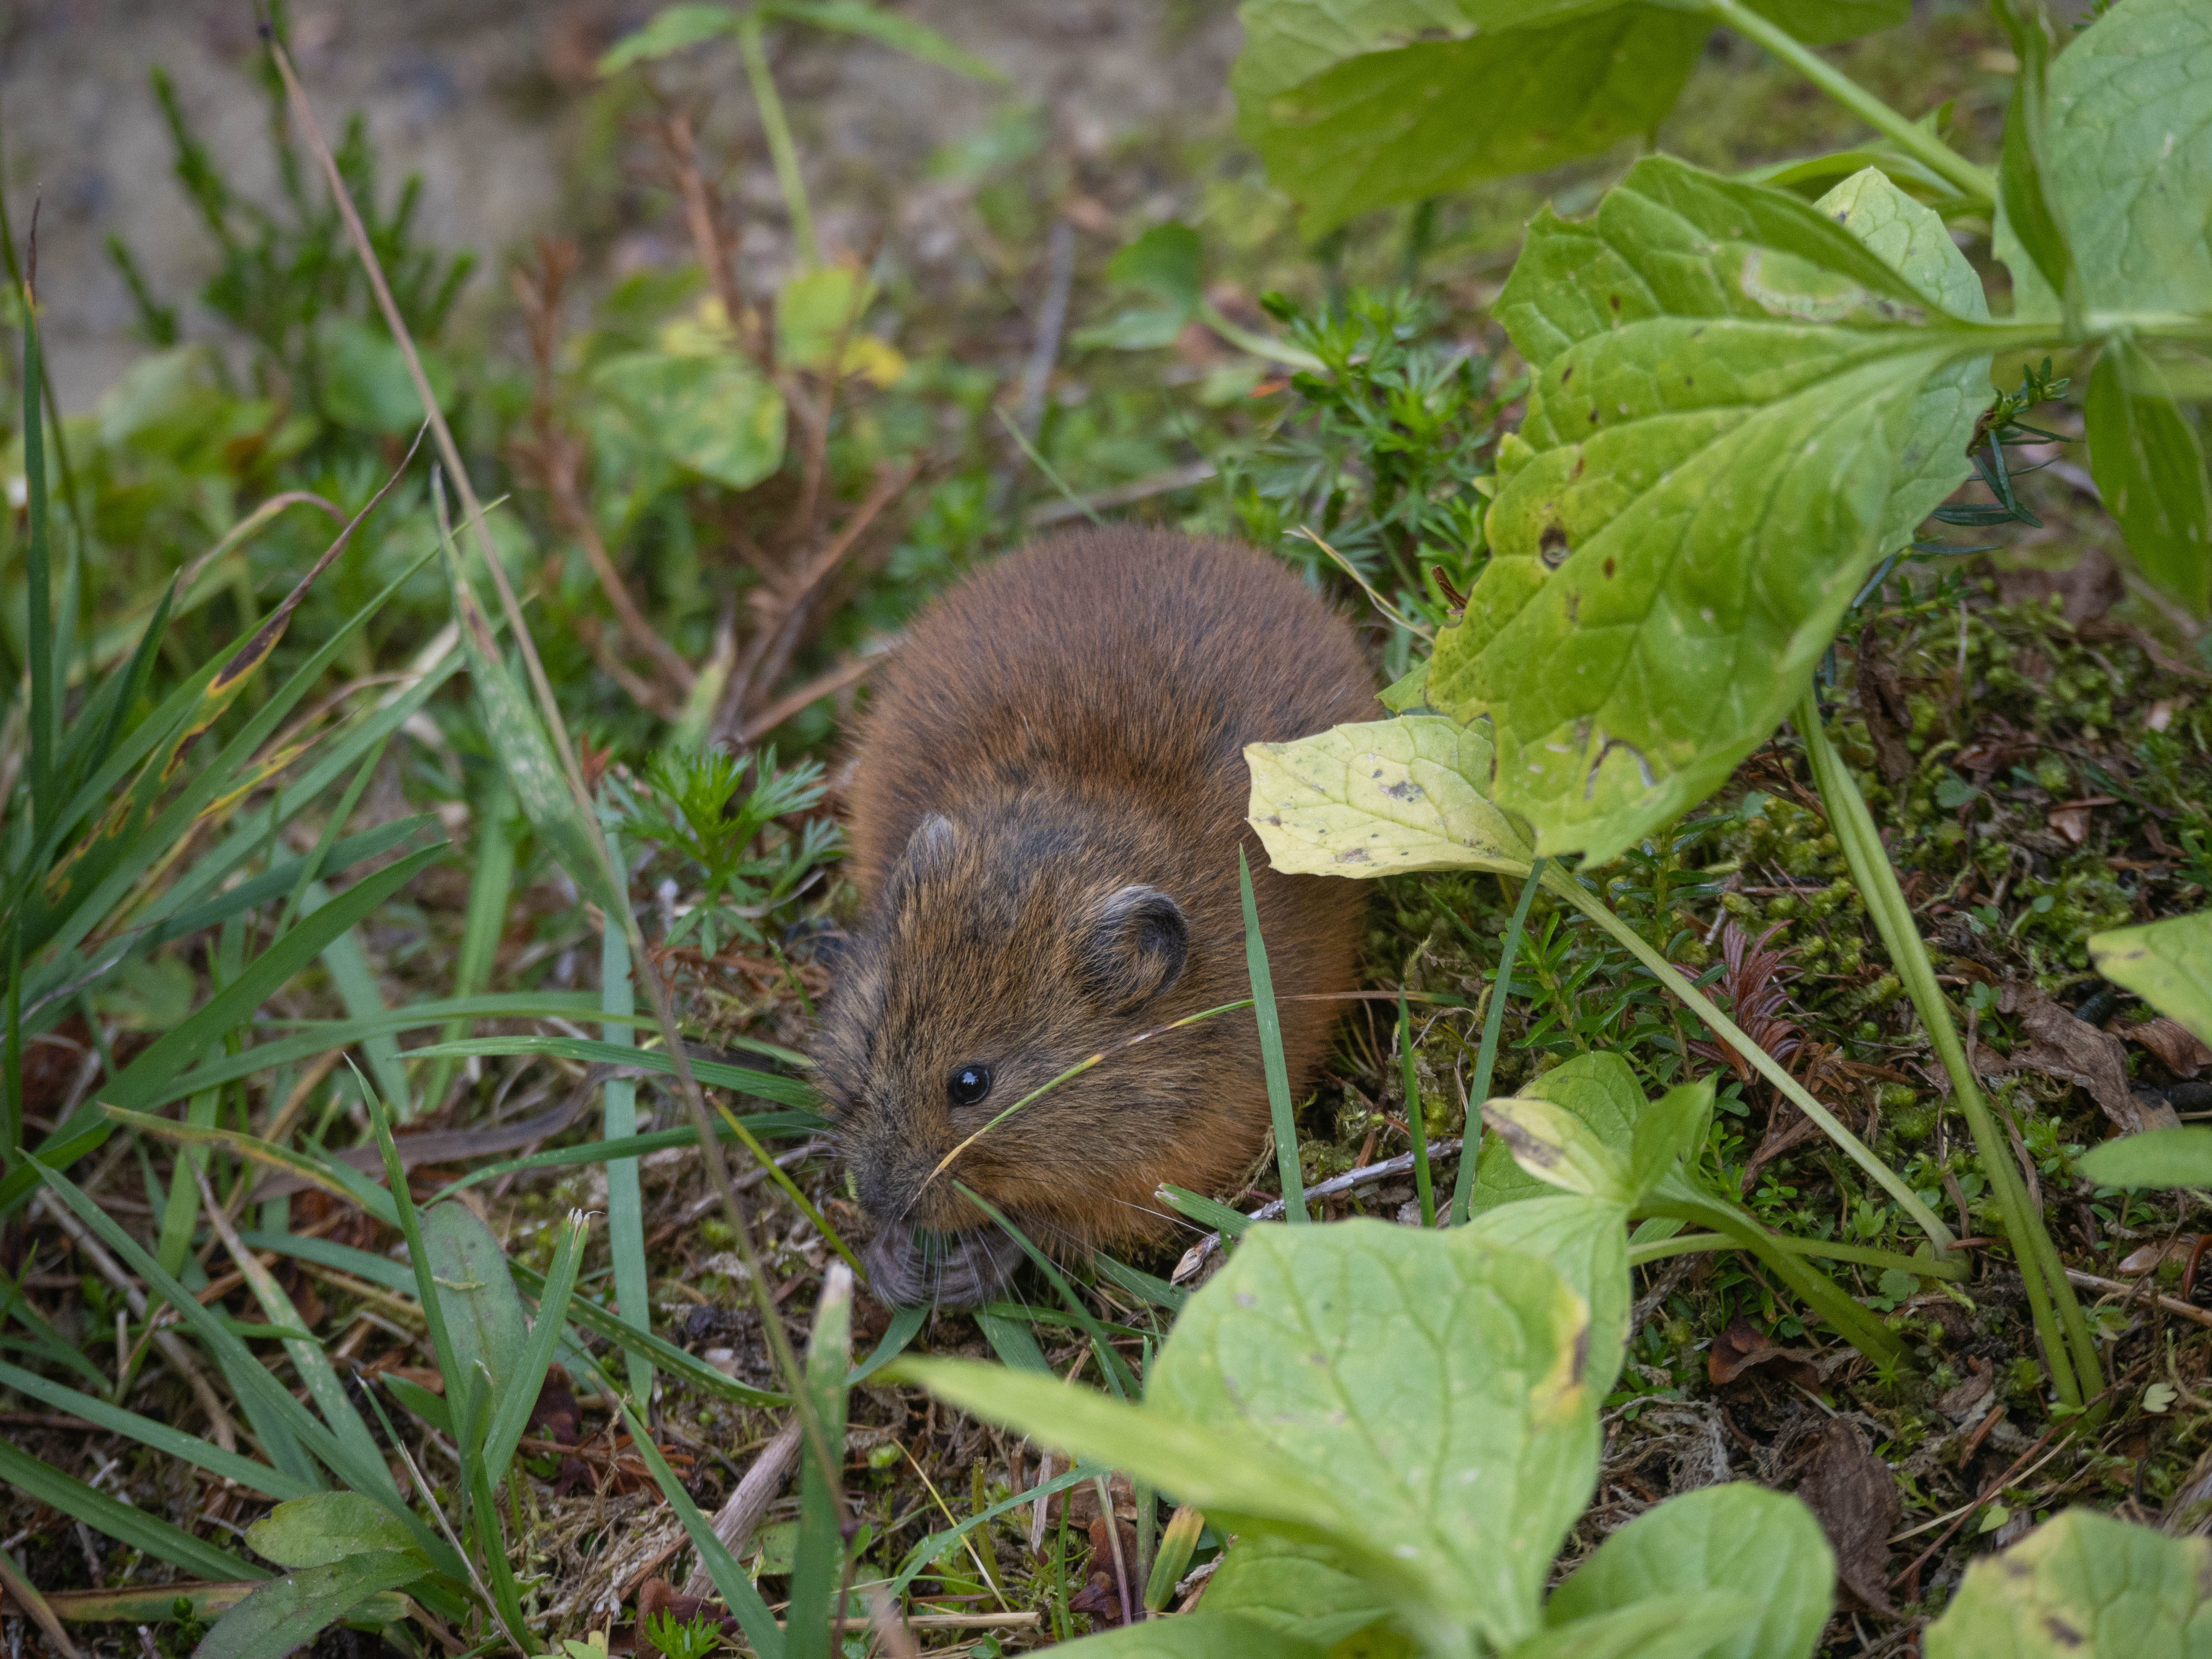 A vole hiding in the bushes